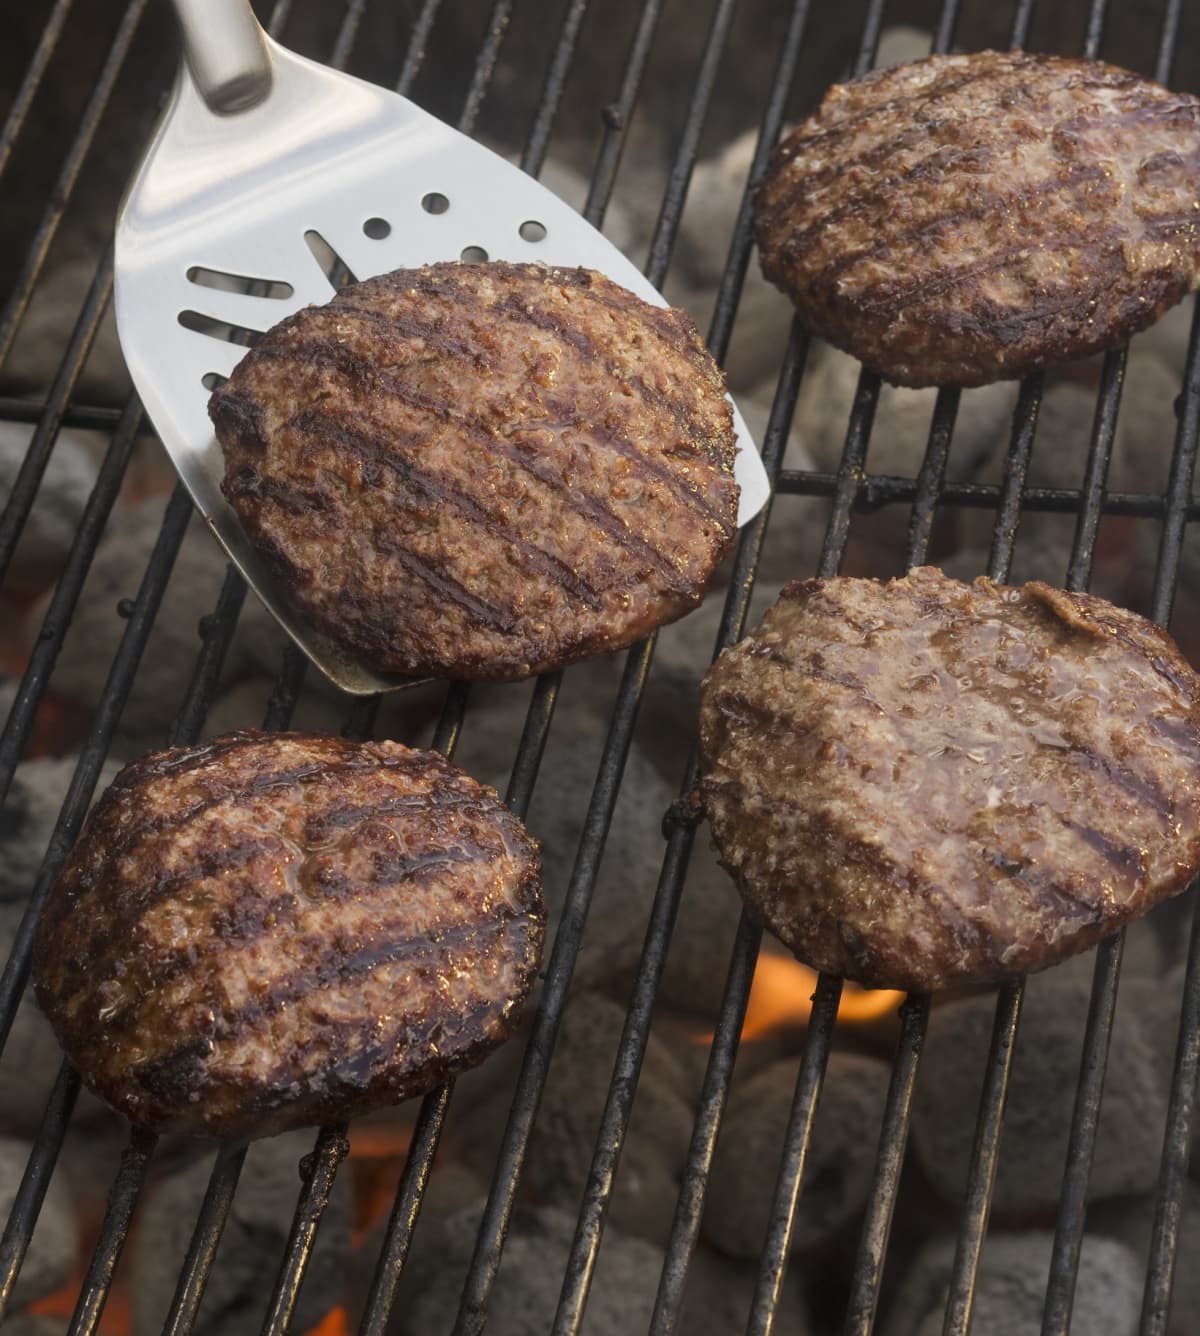 Burgers being grilled on the barbecue